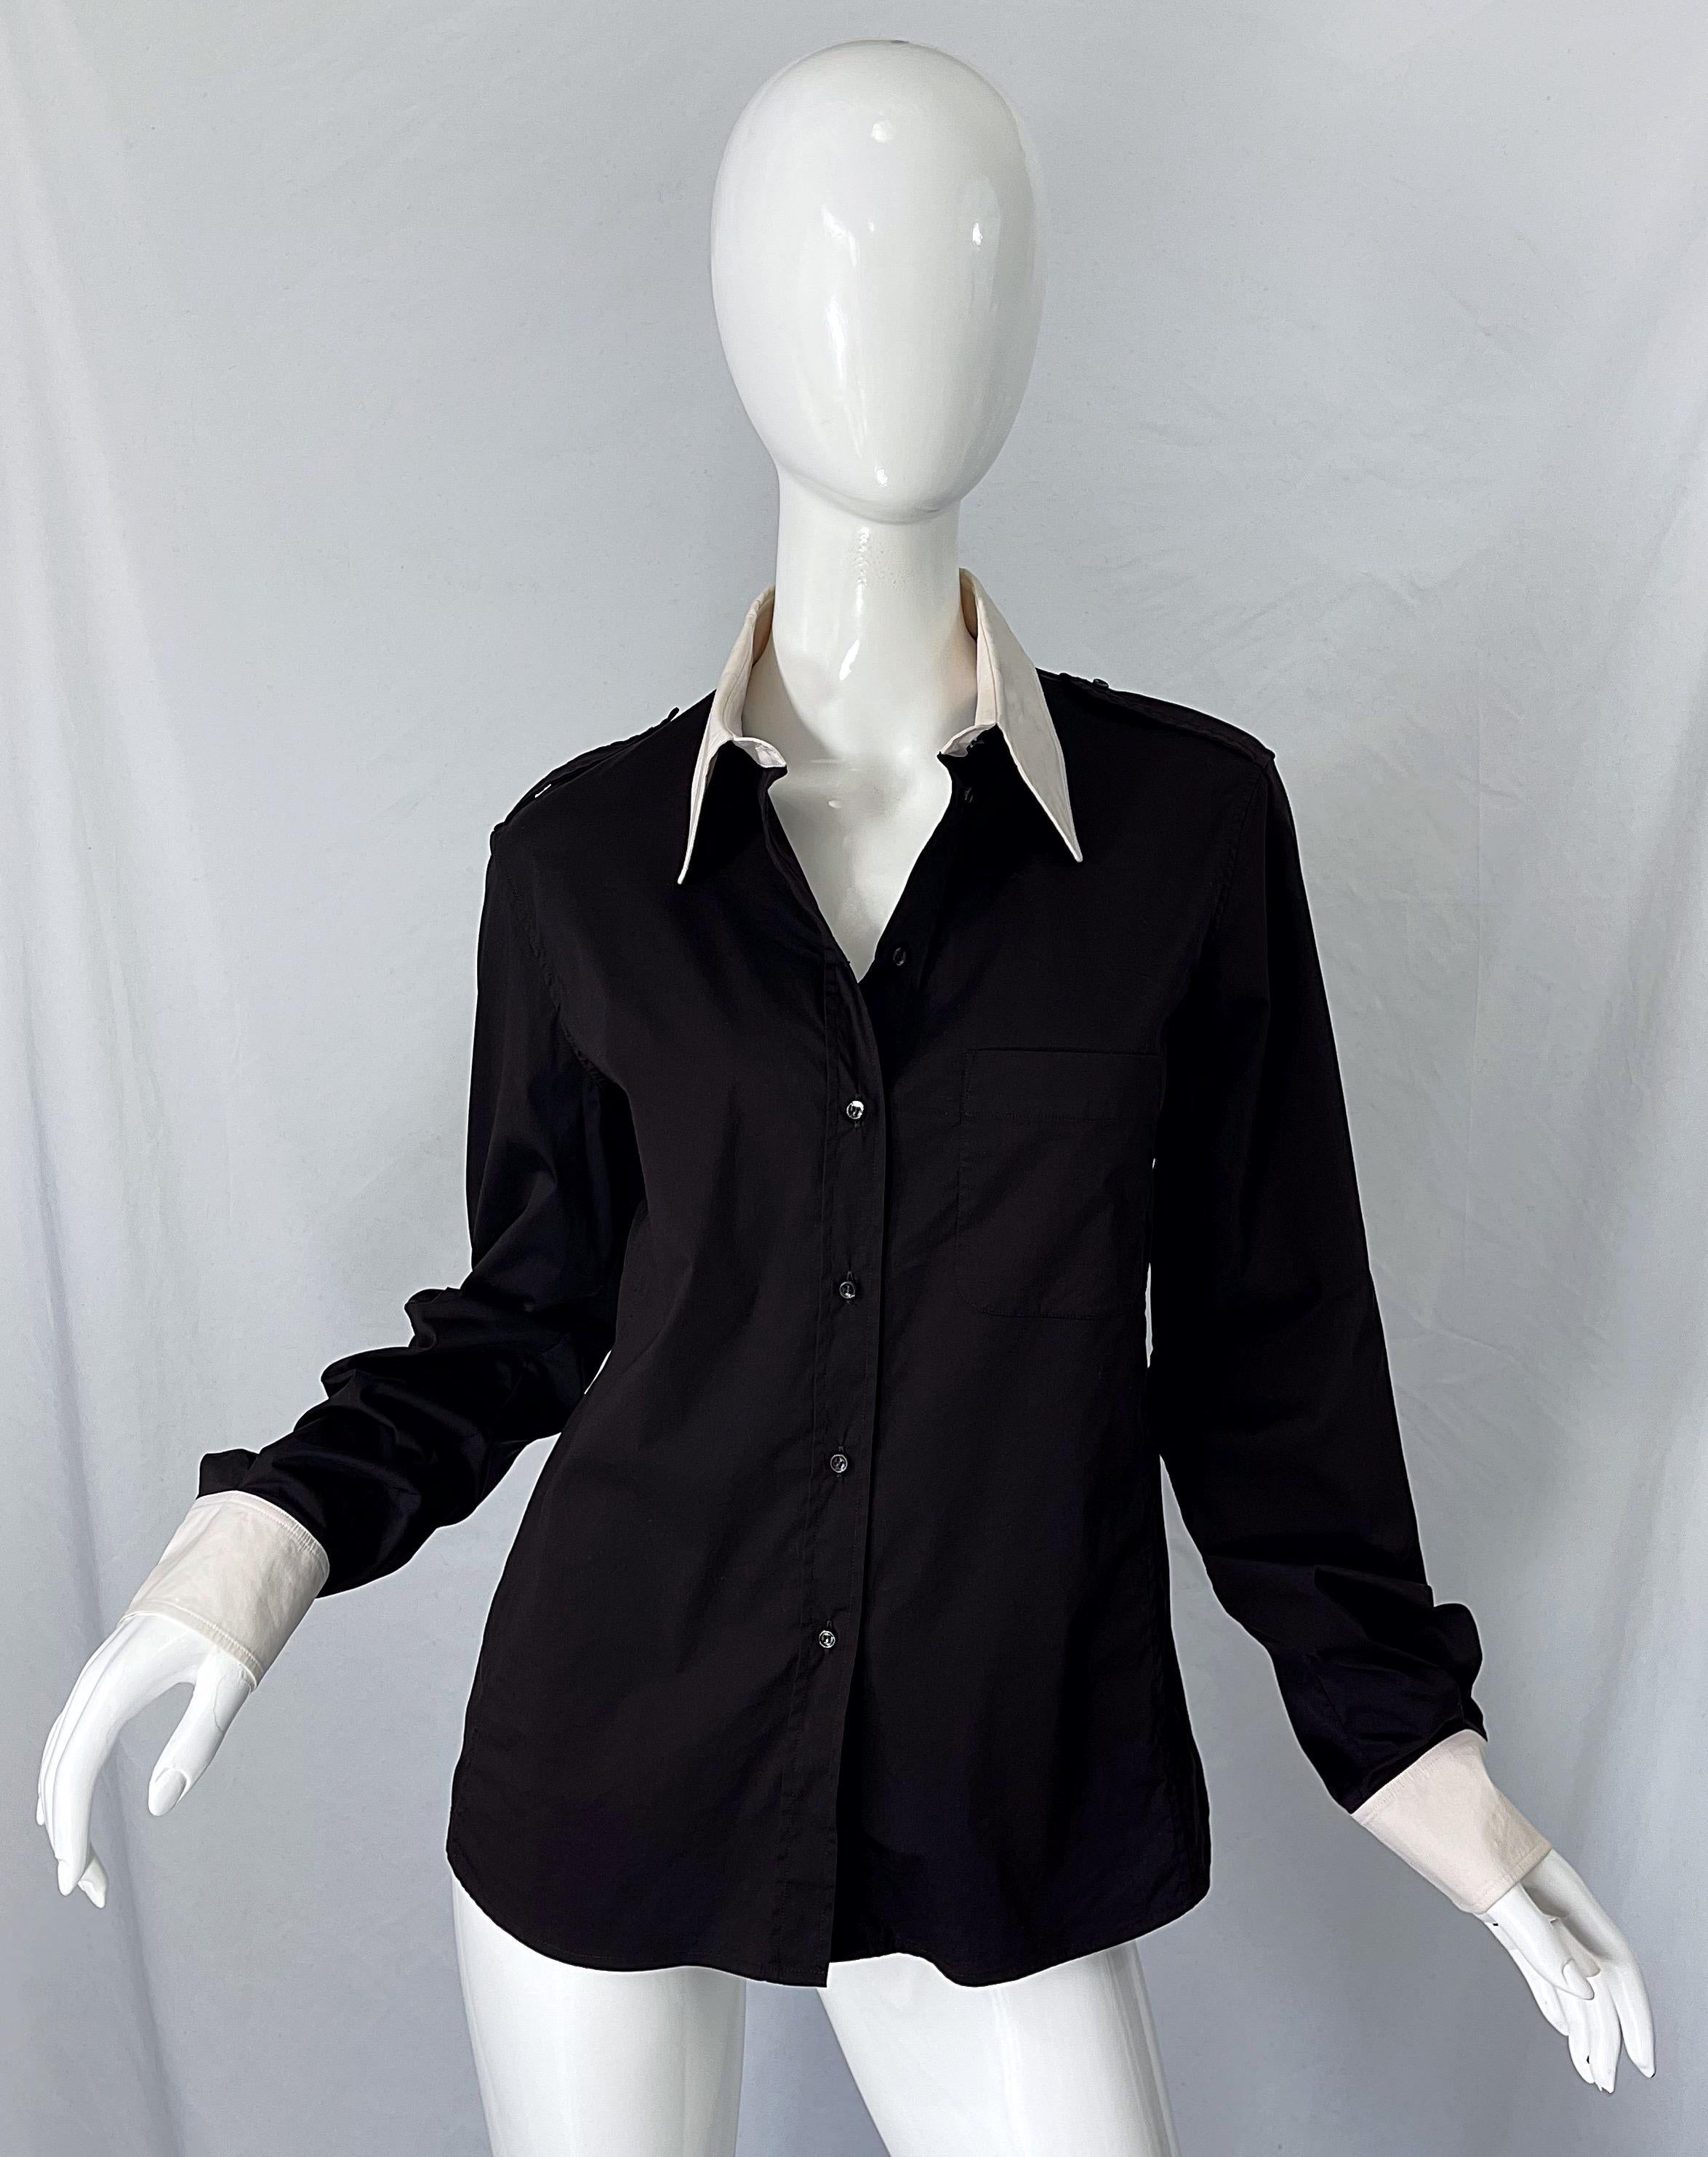 Tom Ford for Yves Saint Laurent Size 44 / 12 Black and White Early 2000s Blouse For Sale 5